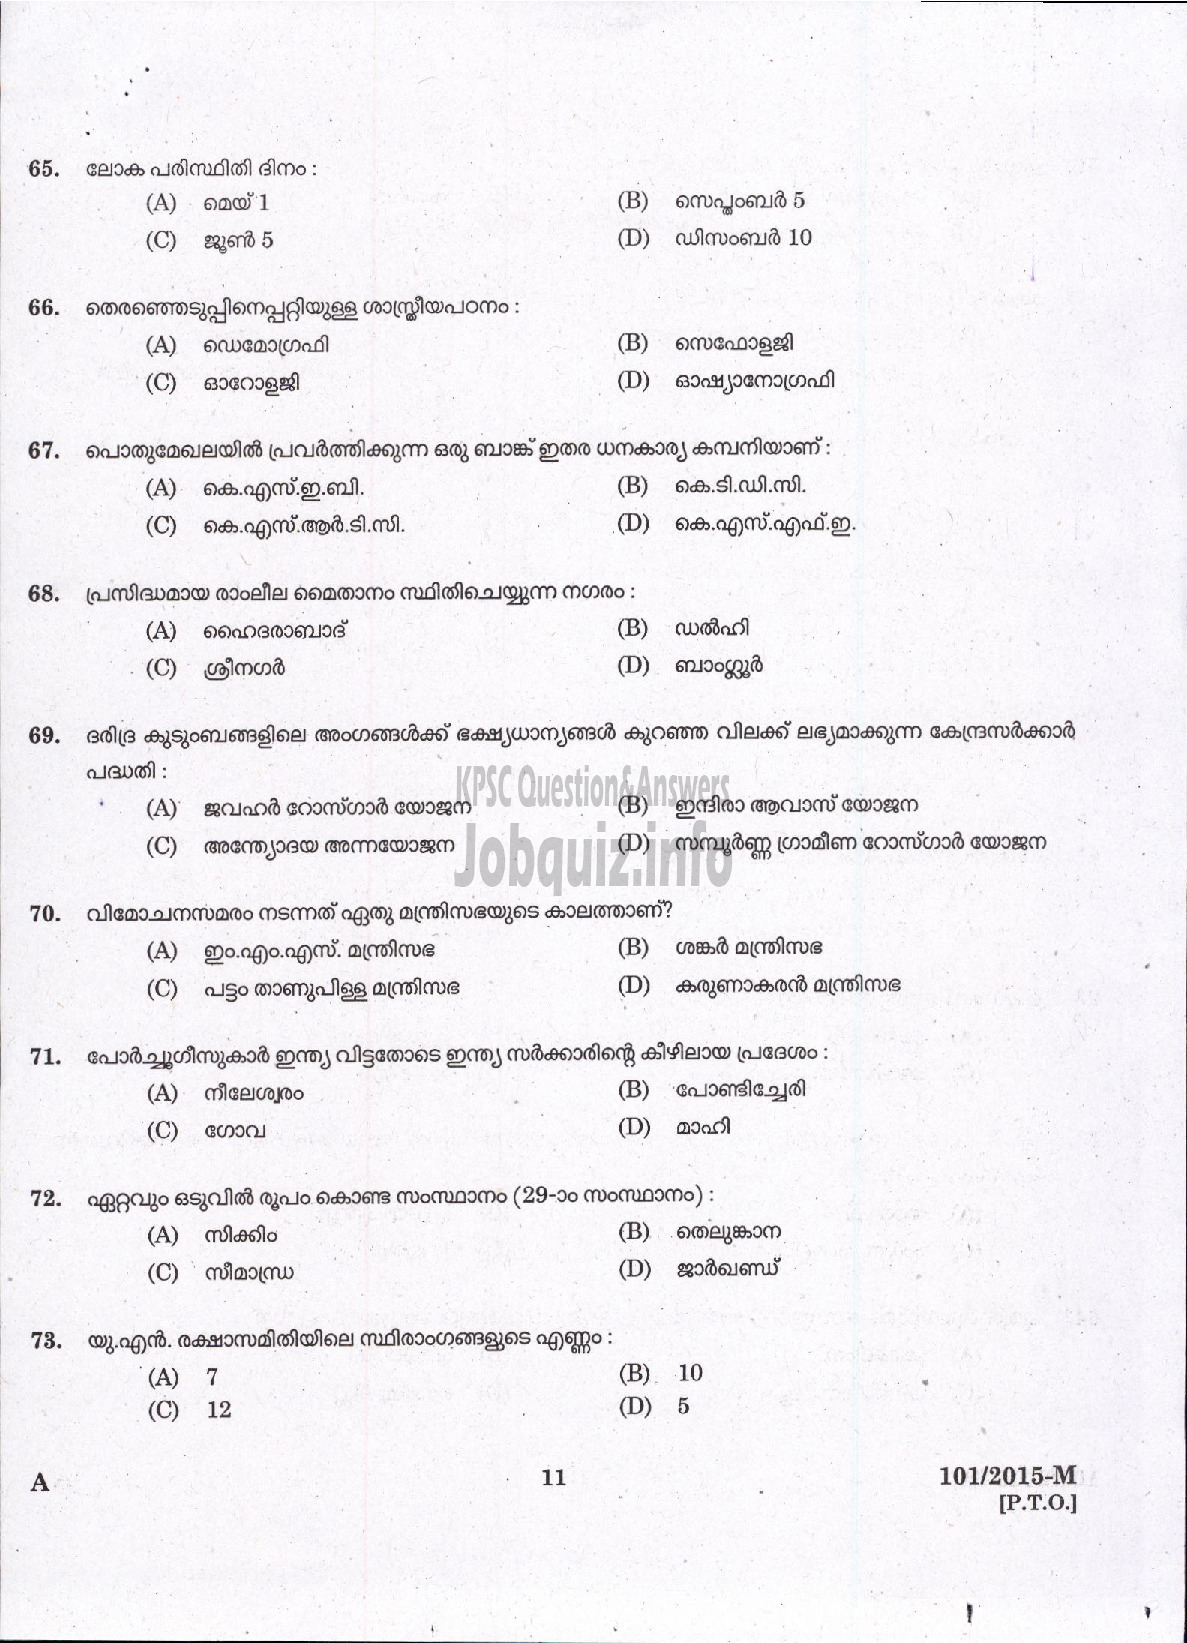 Kerala PSC Question Paper - FIREMAN DRIVER CUM PUMP OPERATOR TRAINEE FIRE AND RESCUE SERVICES ( Malayalam ) -9